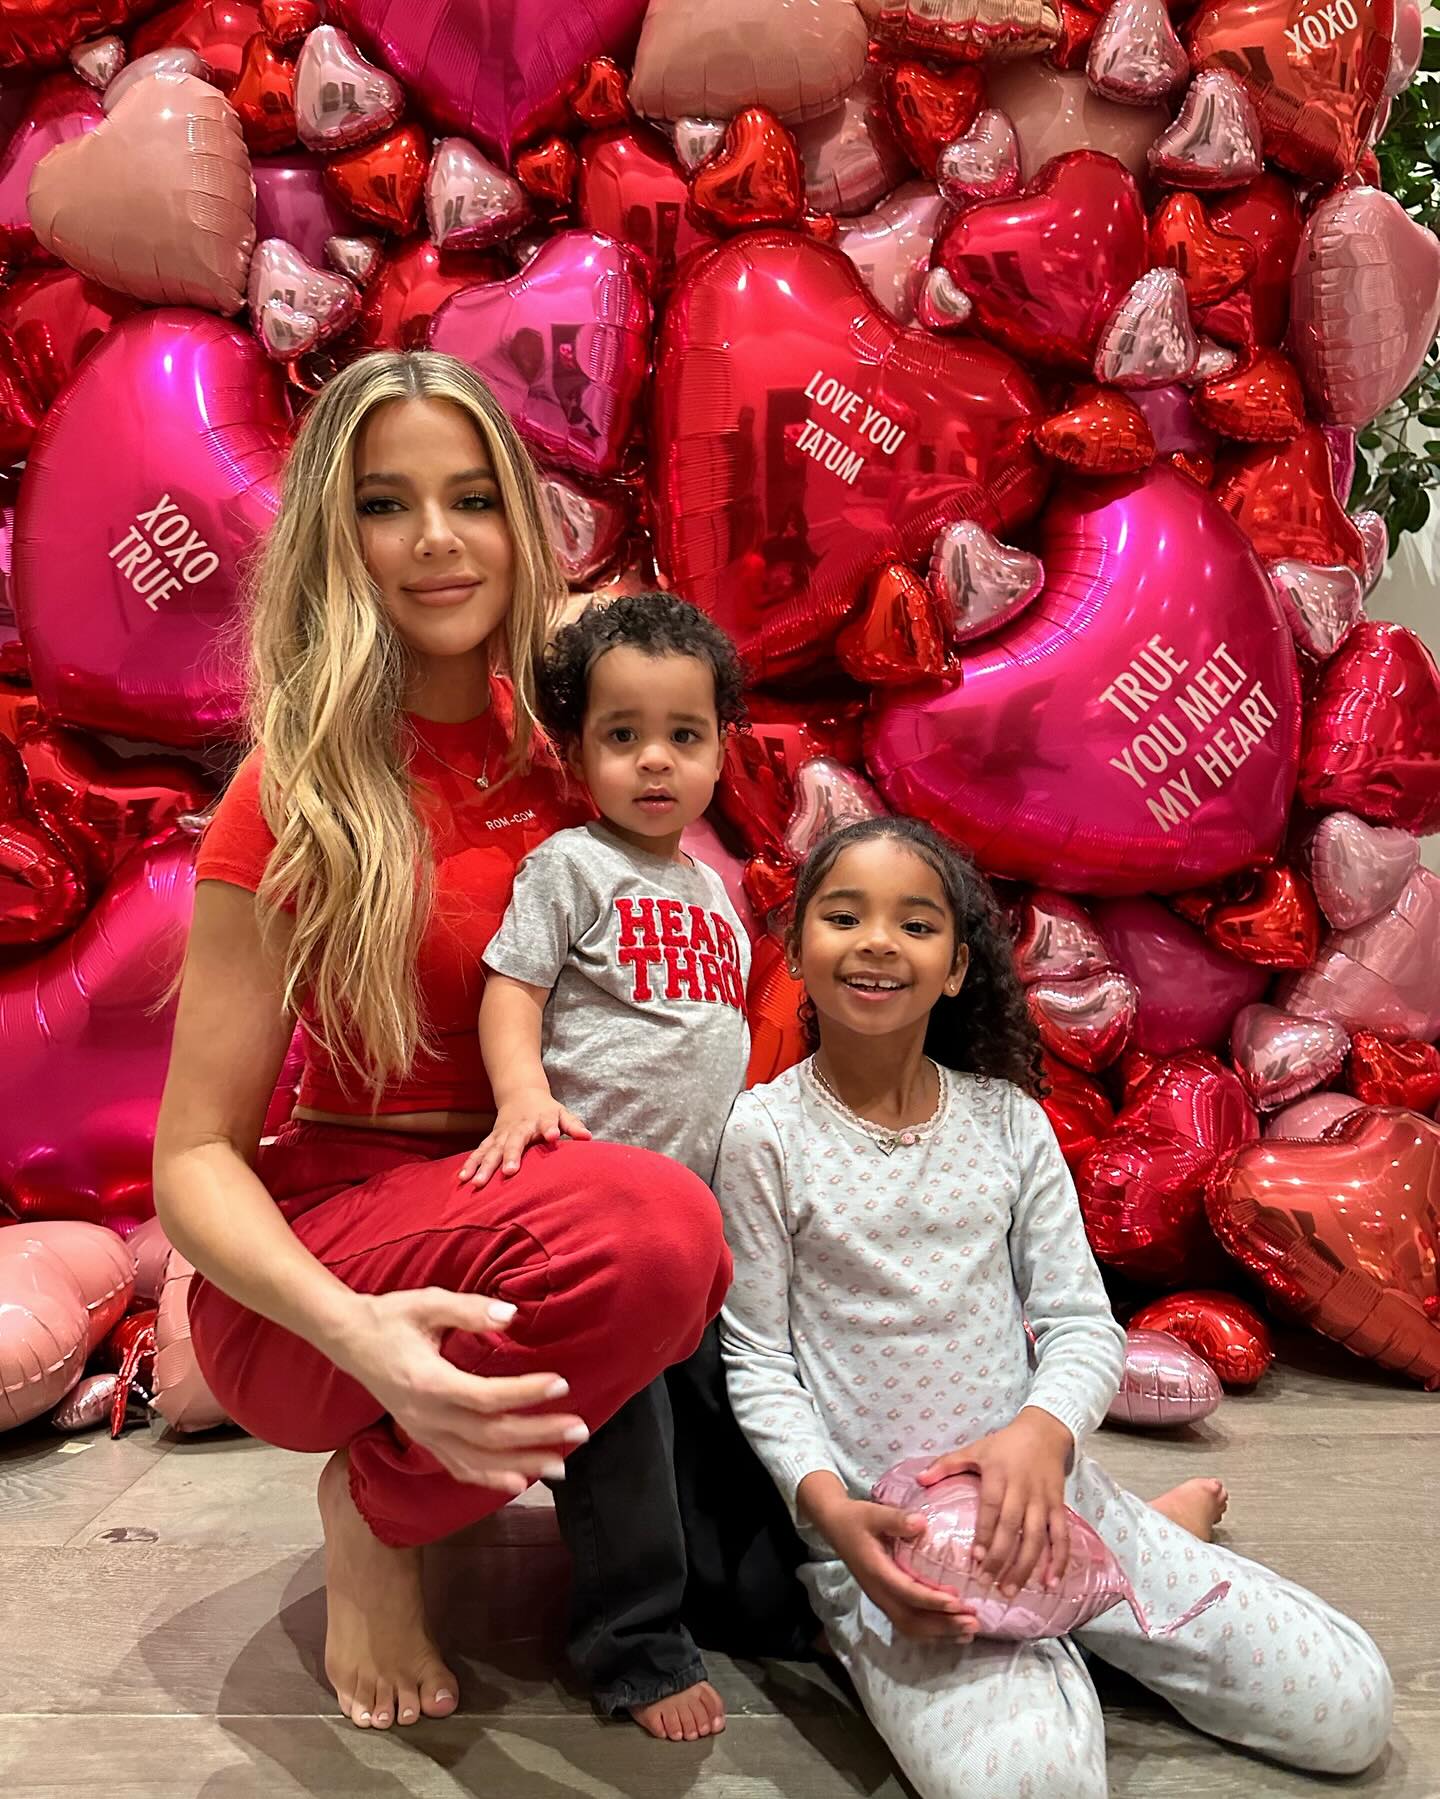 A source has claimed Khloe is trying to re-brand herself to be more 'family-friendly'